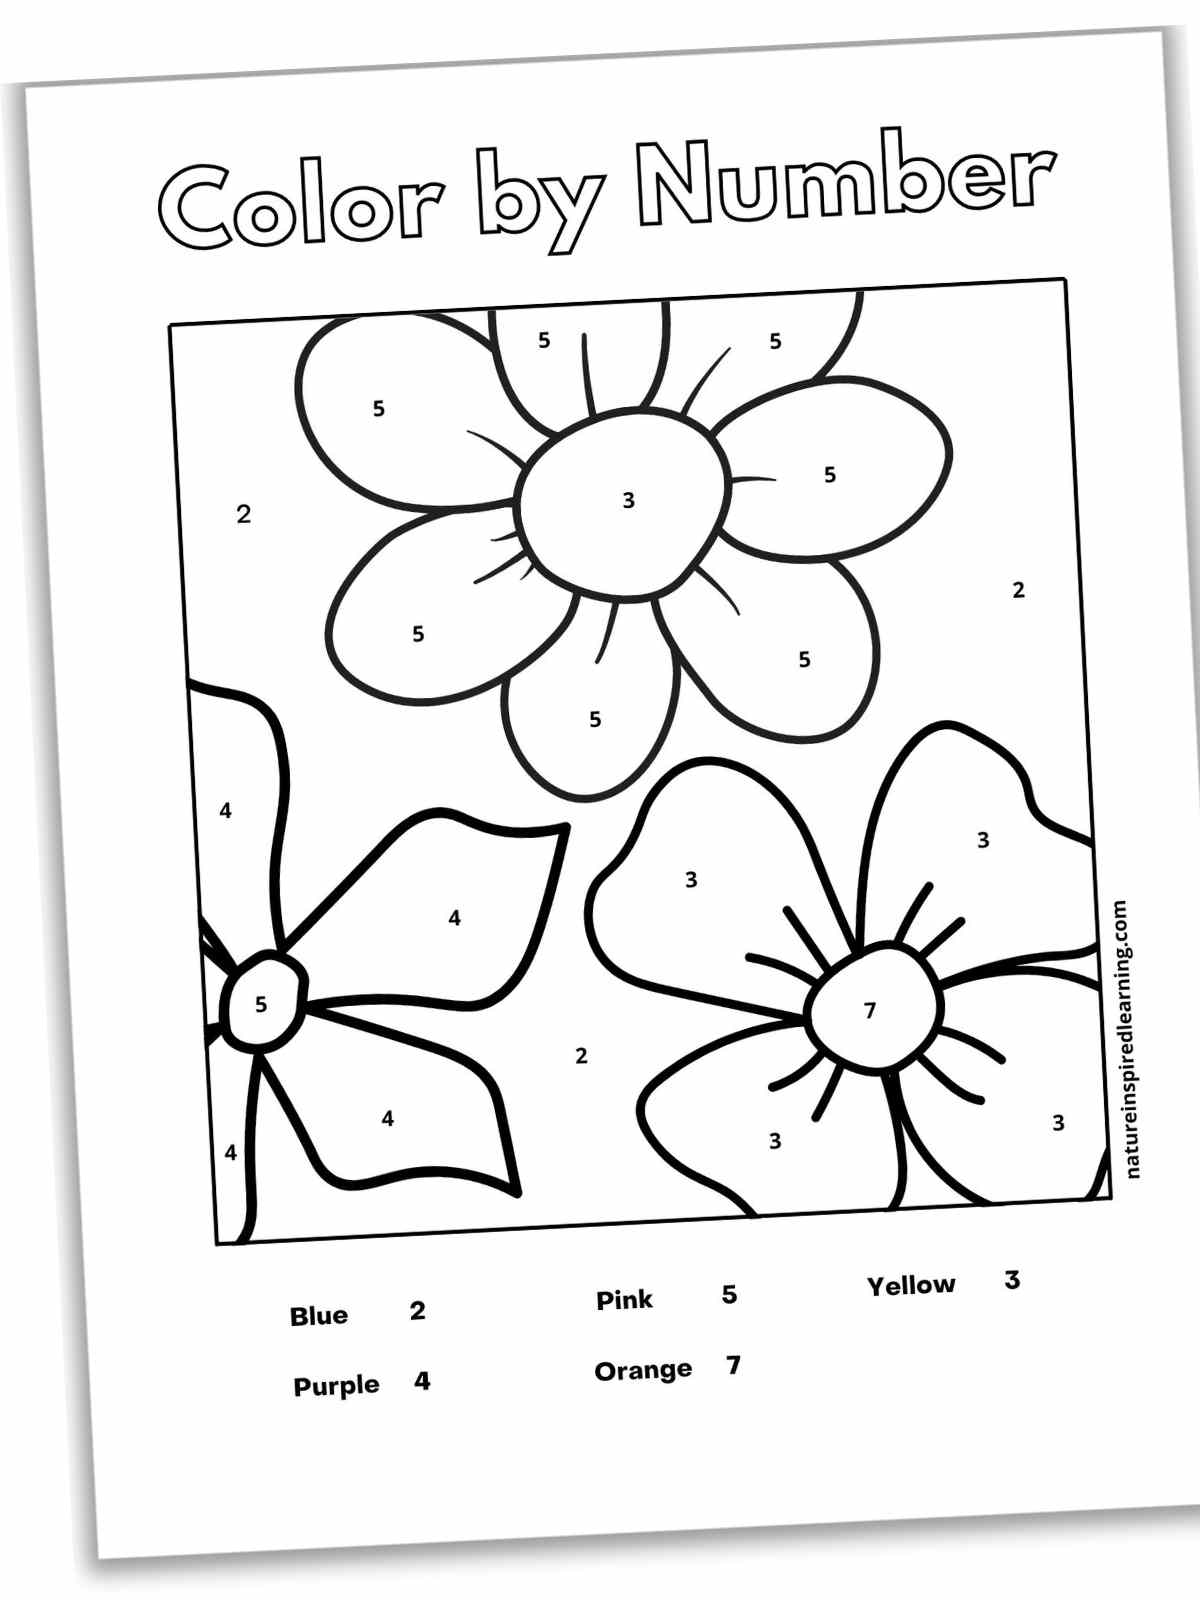 black and white sheet with three simple flower outlines with numbers within each petal, center, and the background. Number key at the bottom.